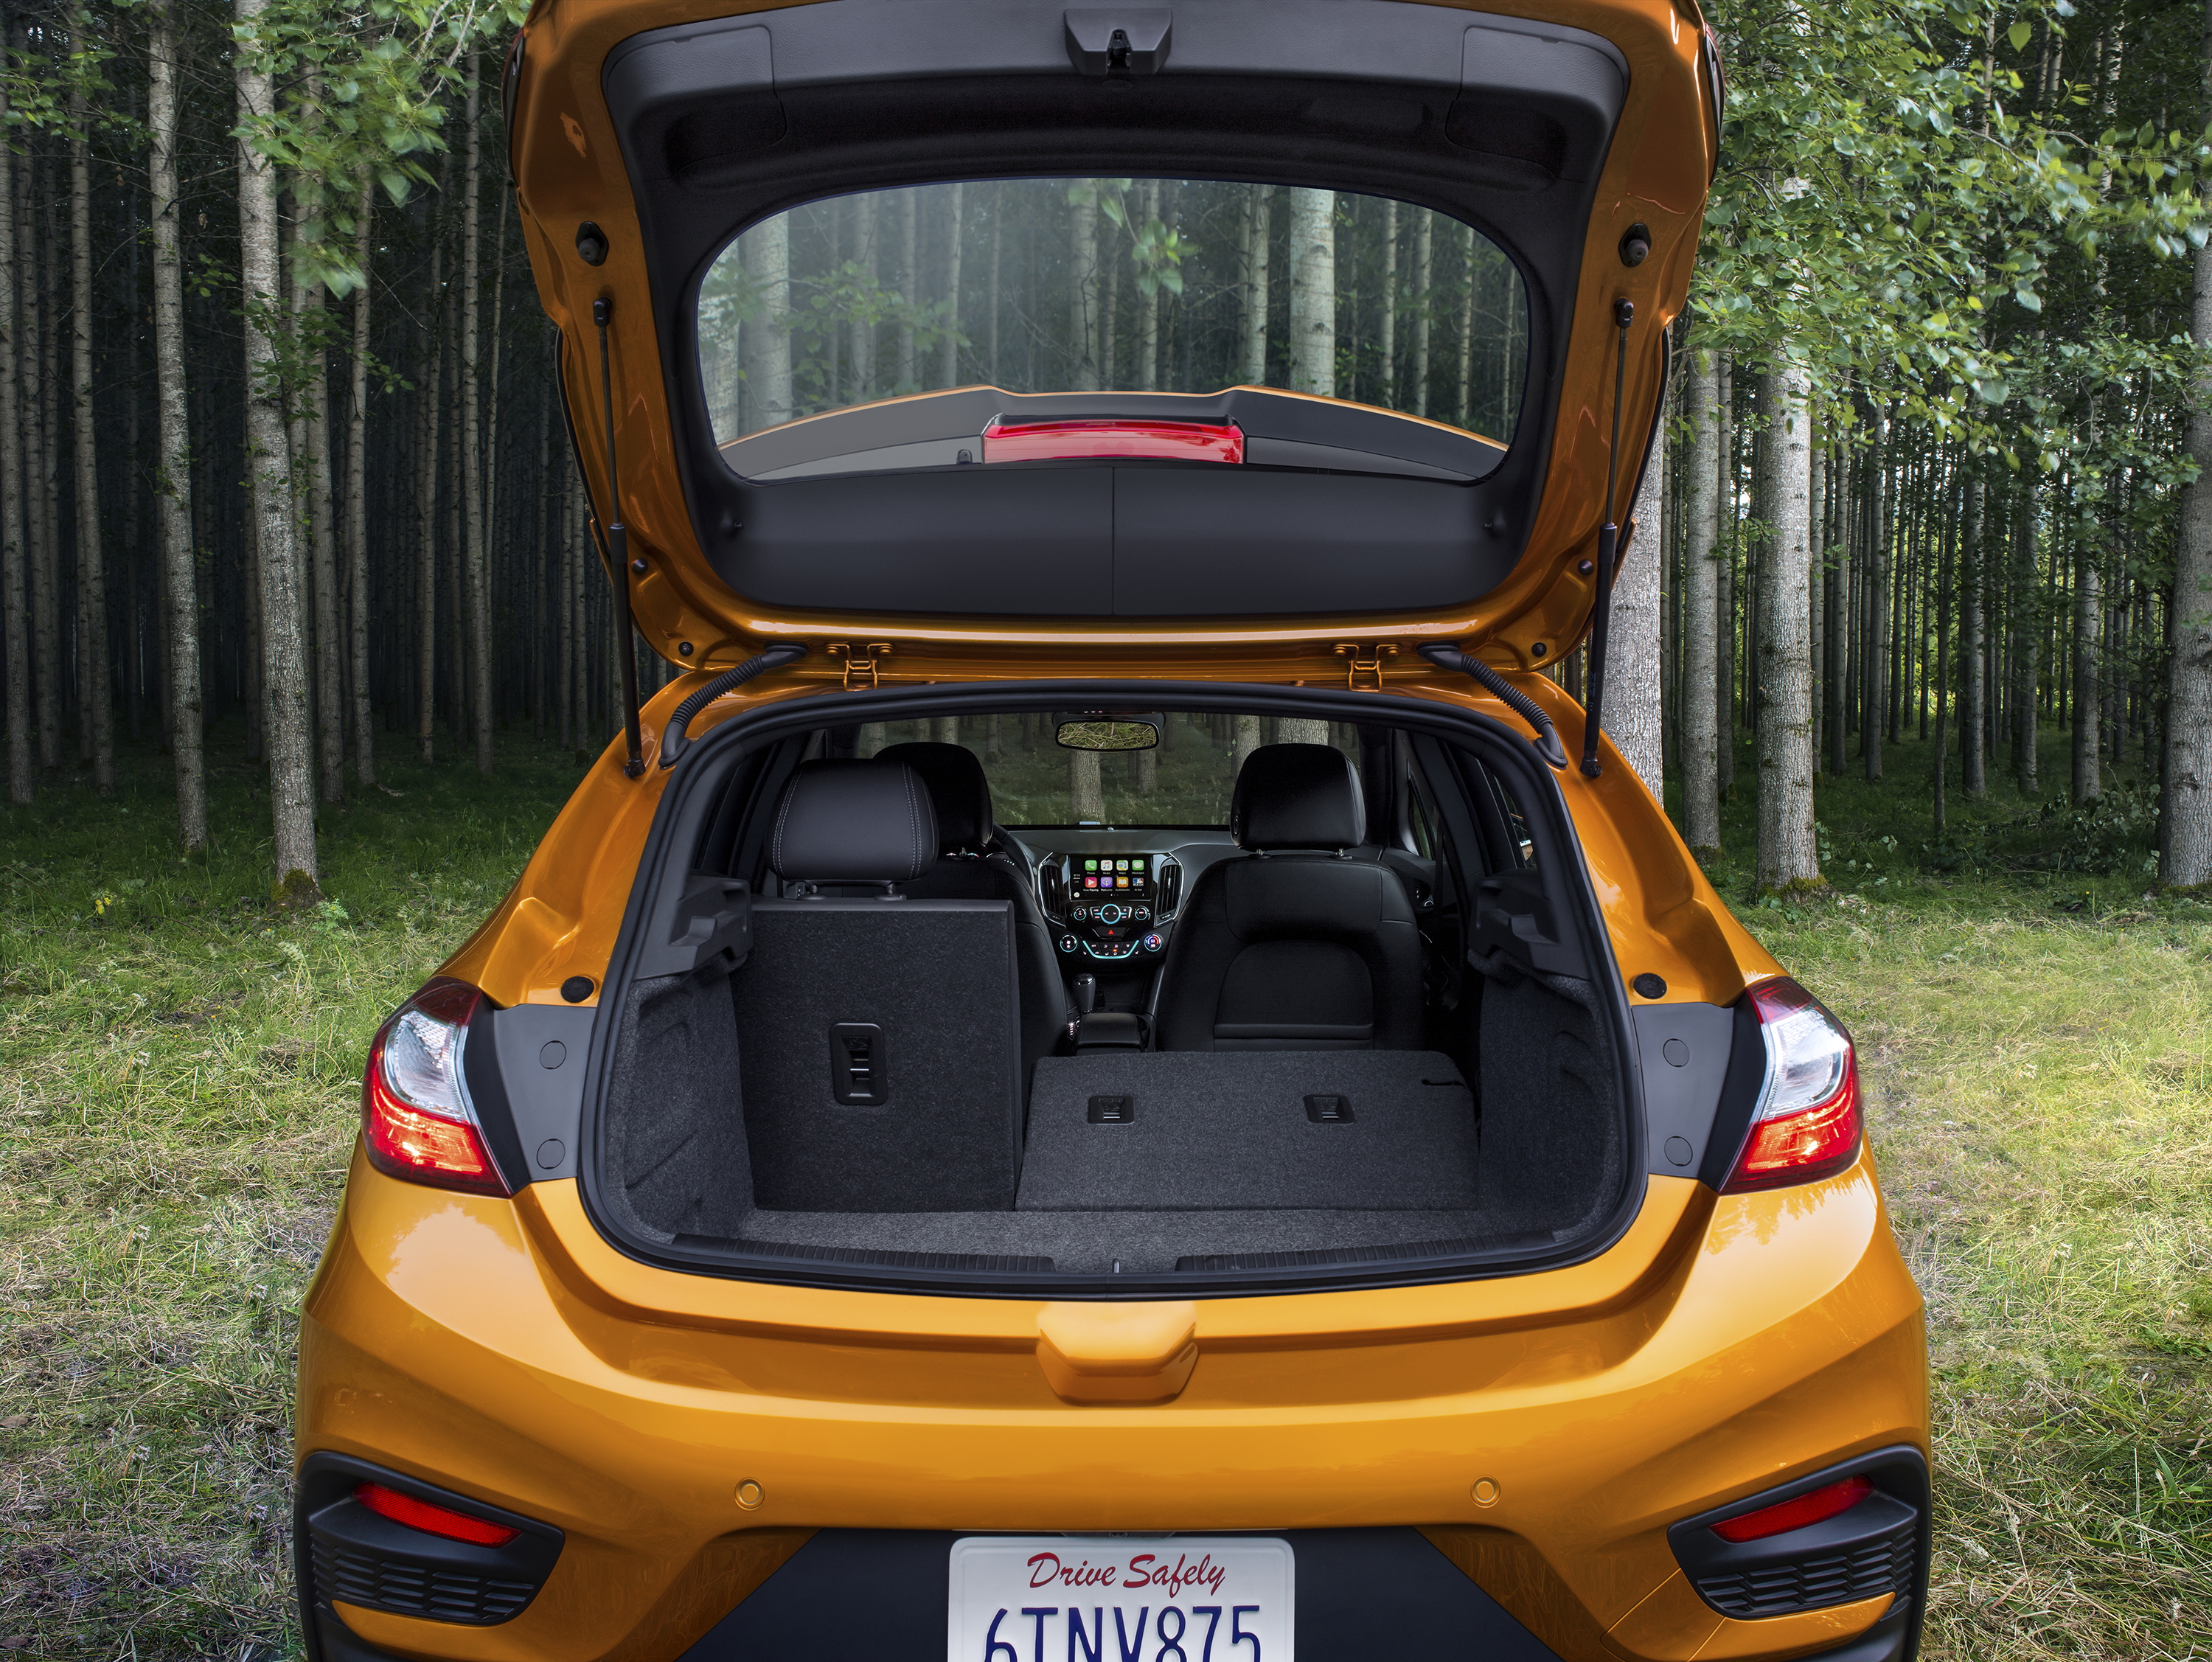 The 2017 Cruze Hatch offers 47.2 cubic feet of rear cargo room w